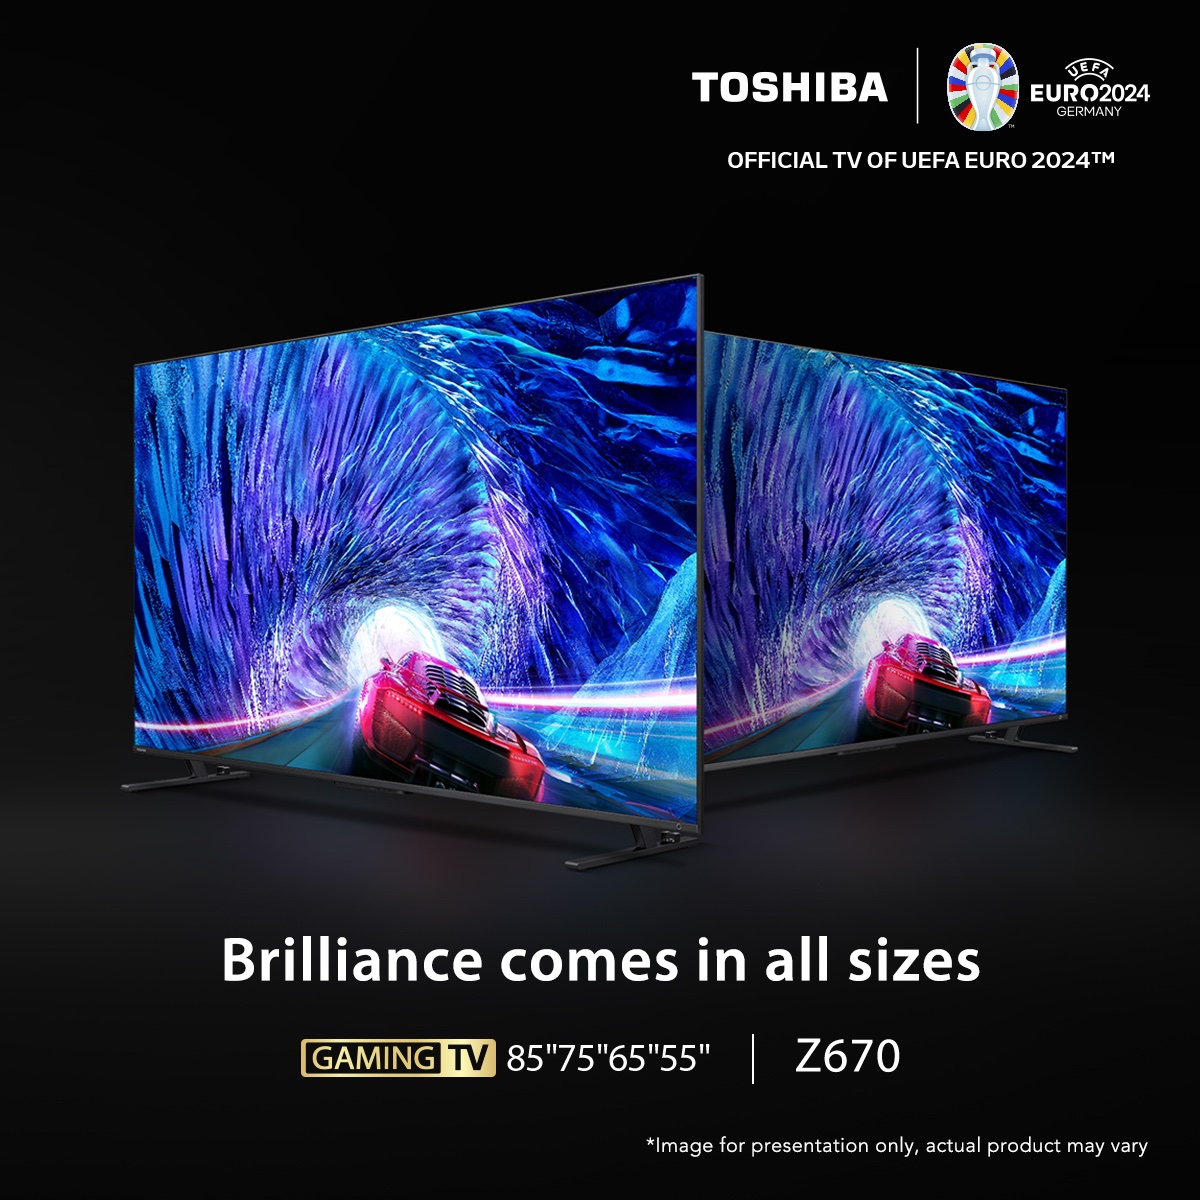 Experience immersive vision in all sizes with #ToshibaTV Z670. Choose from 85”, 75”, 65”, and 55” options to bring brilliance into your home. Which size fits your space best? Comment below and follow for home entertainment solutions. #BeRealCraftsmanship